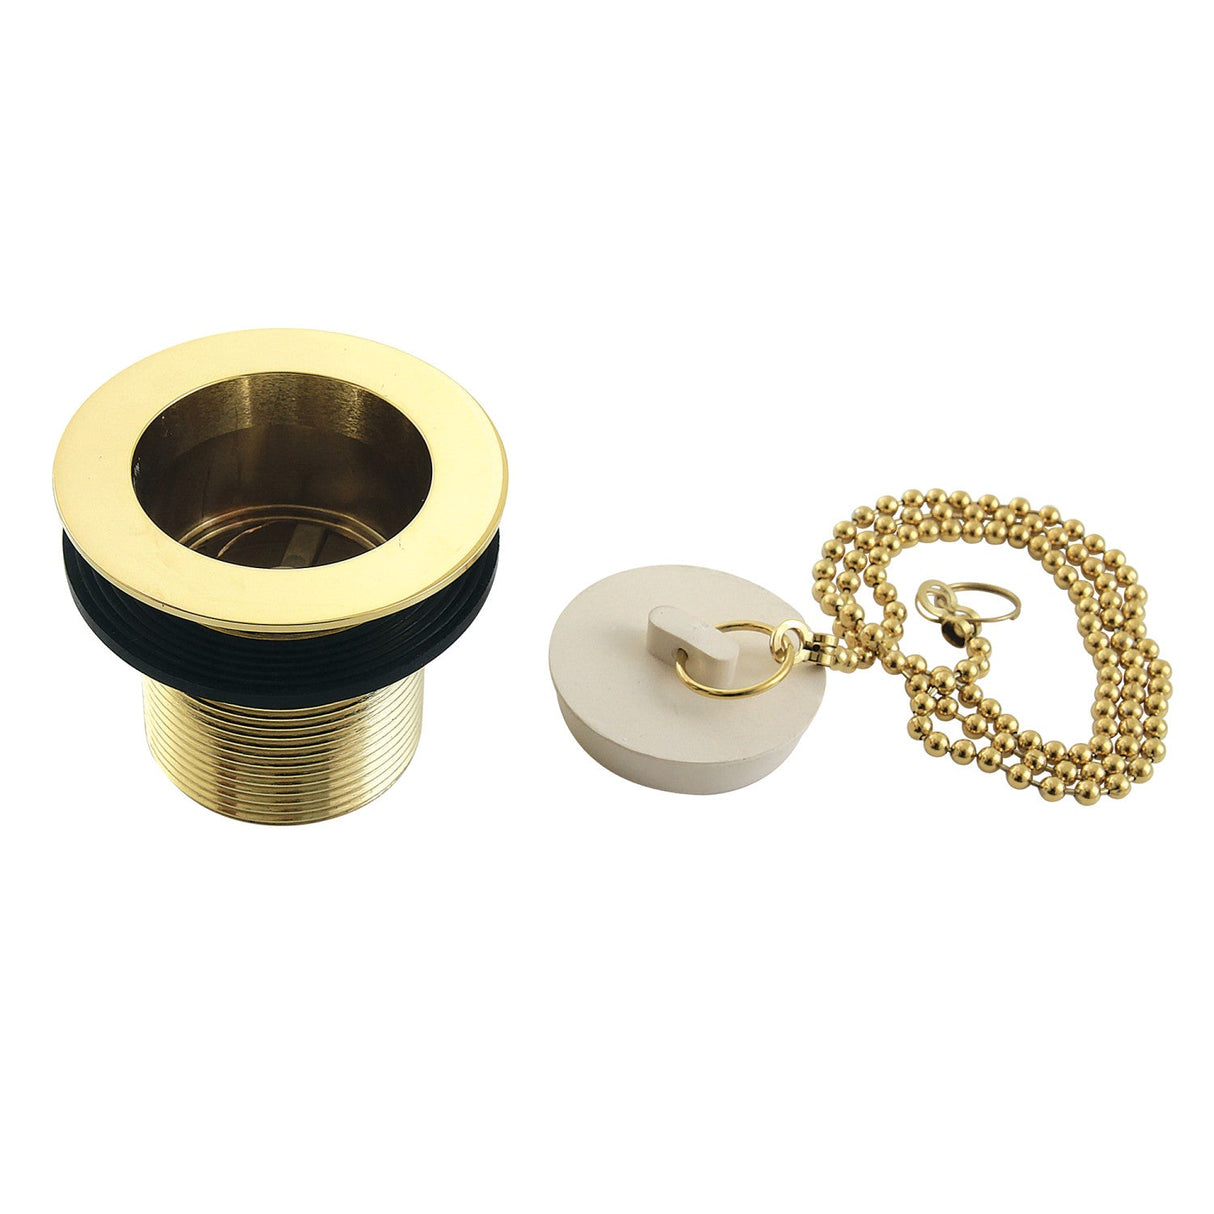 Made To Match DSP17PB 1-1/2-Inch Chain and Stopper Tub Drain with 1-3/4-Inch Body Thread, Polished Brass